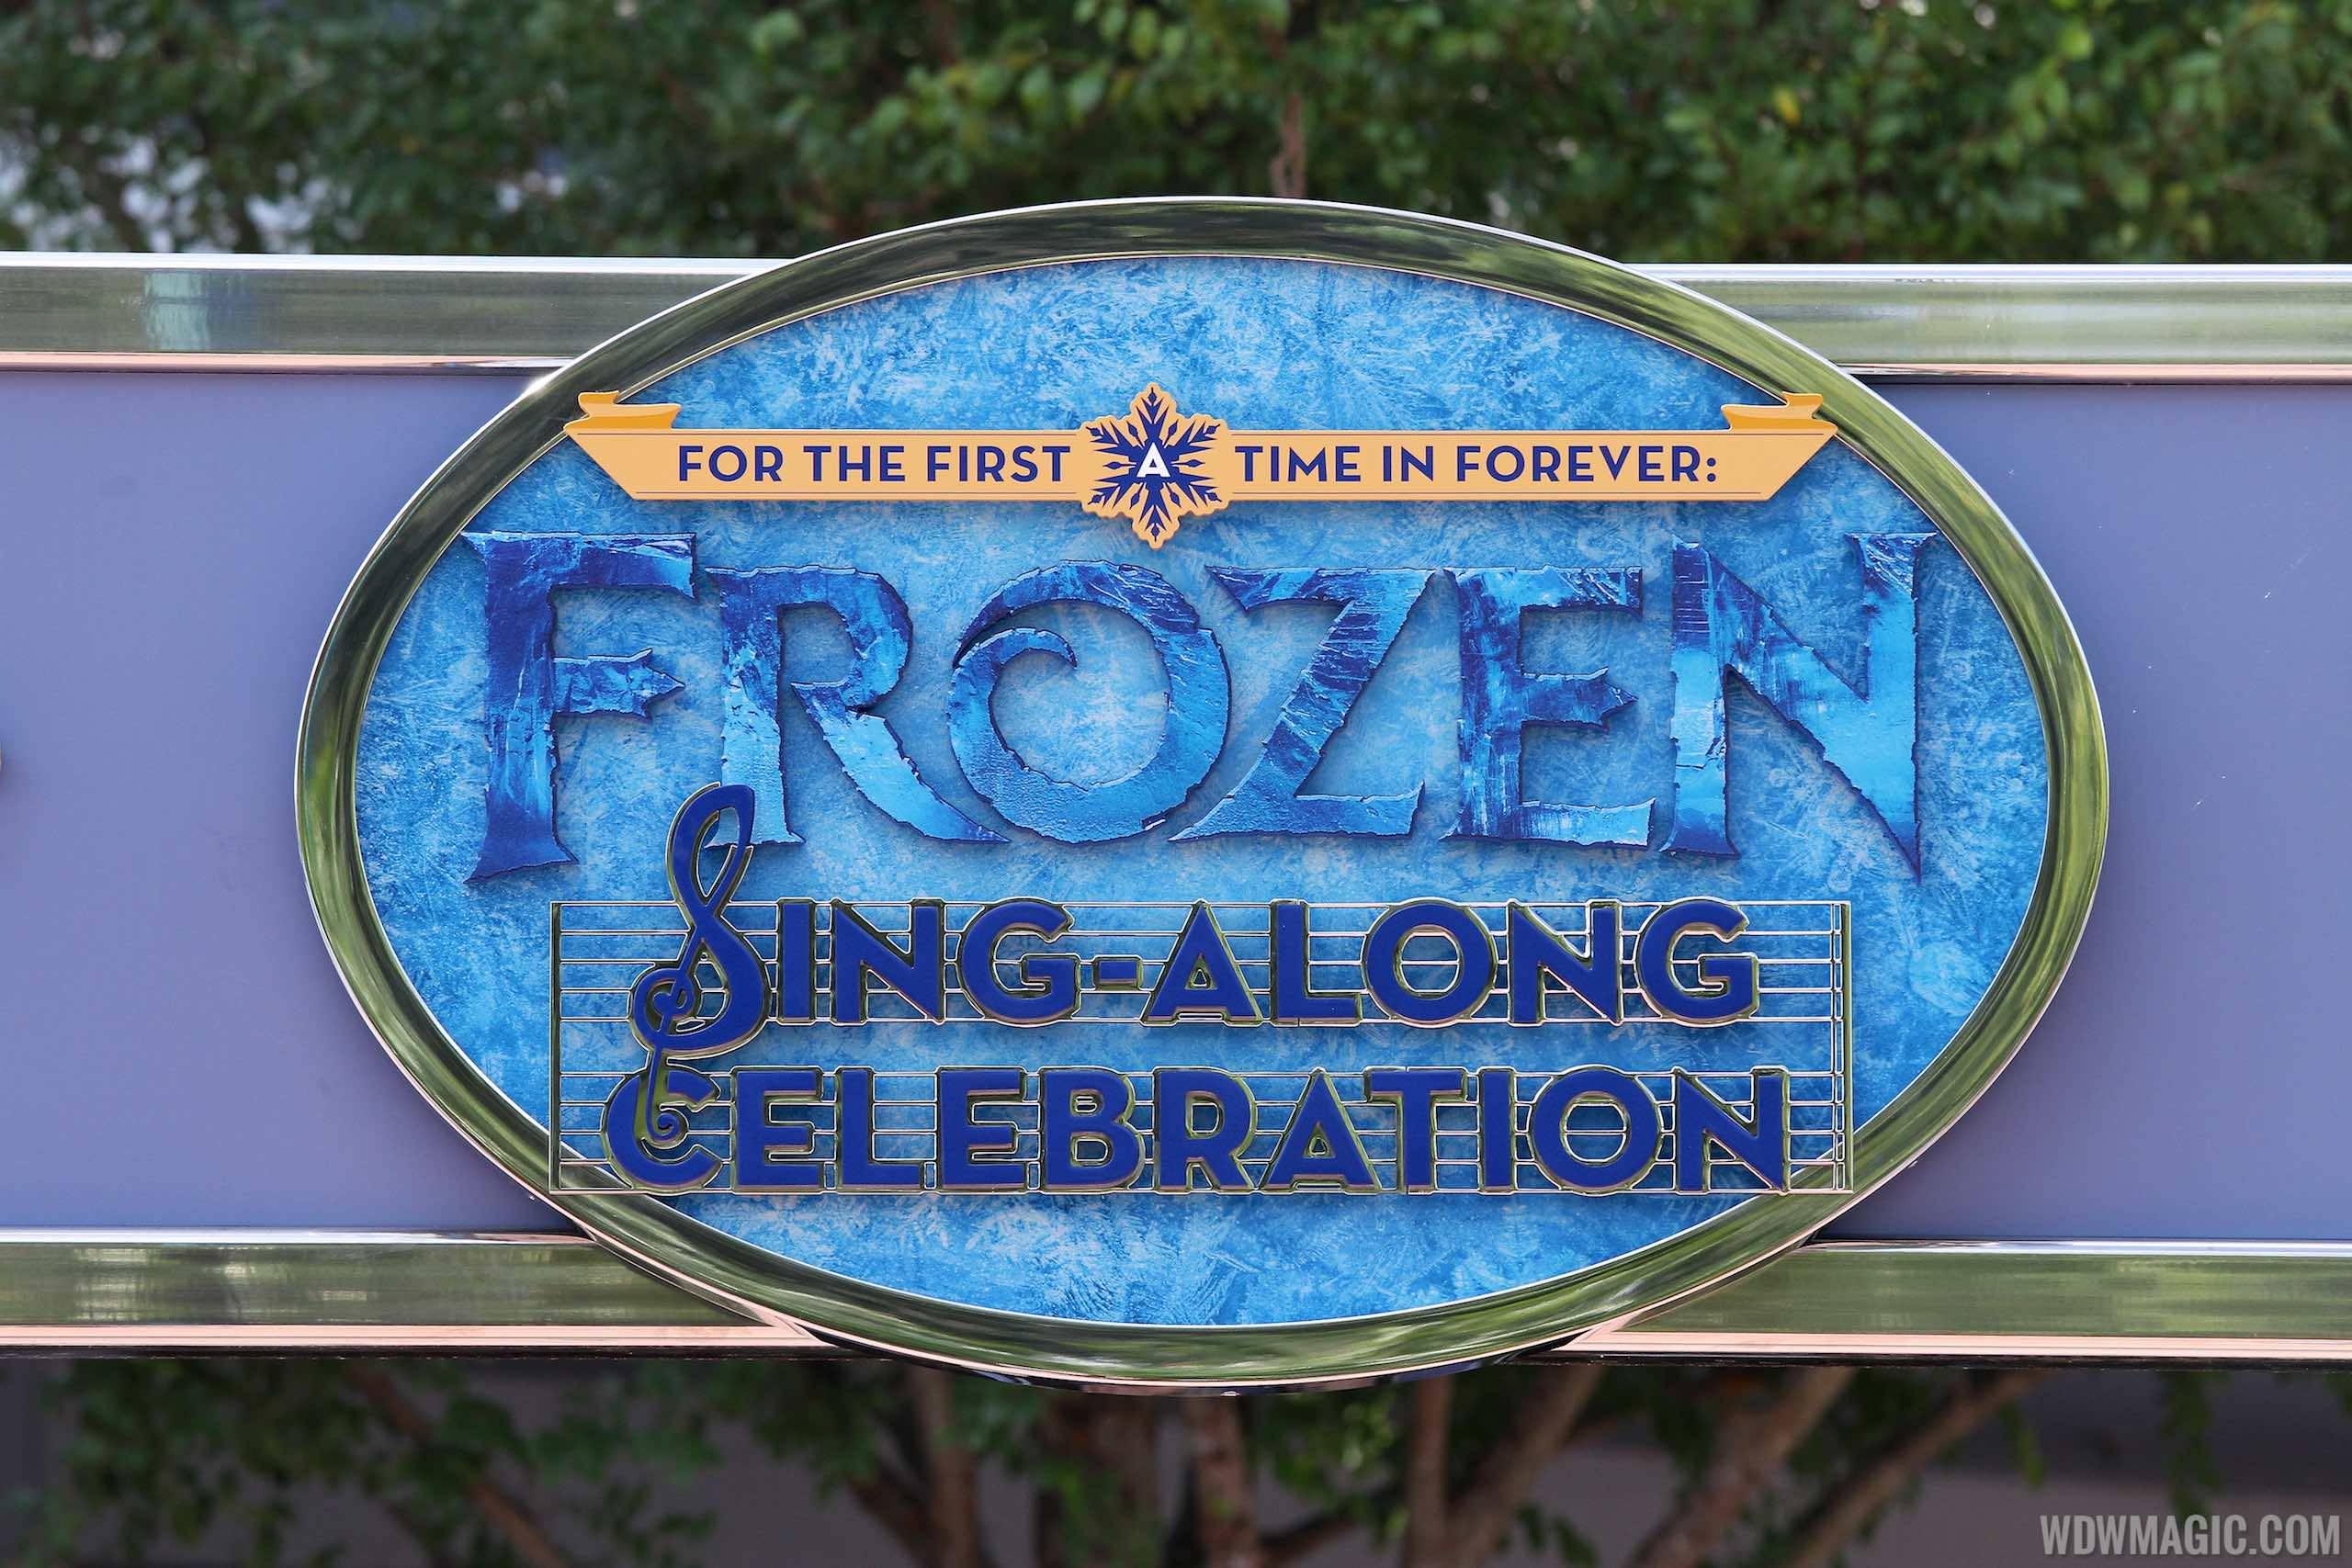 A 'Frozen' Sing-Along Celebration will move to the former home of American Idol - the newly named Hyperion Theater